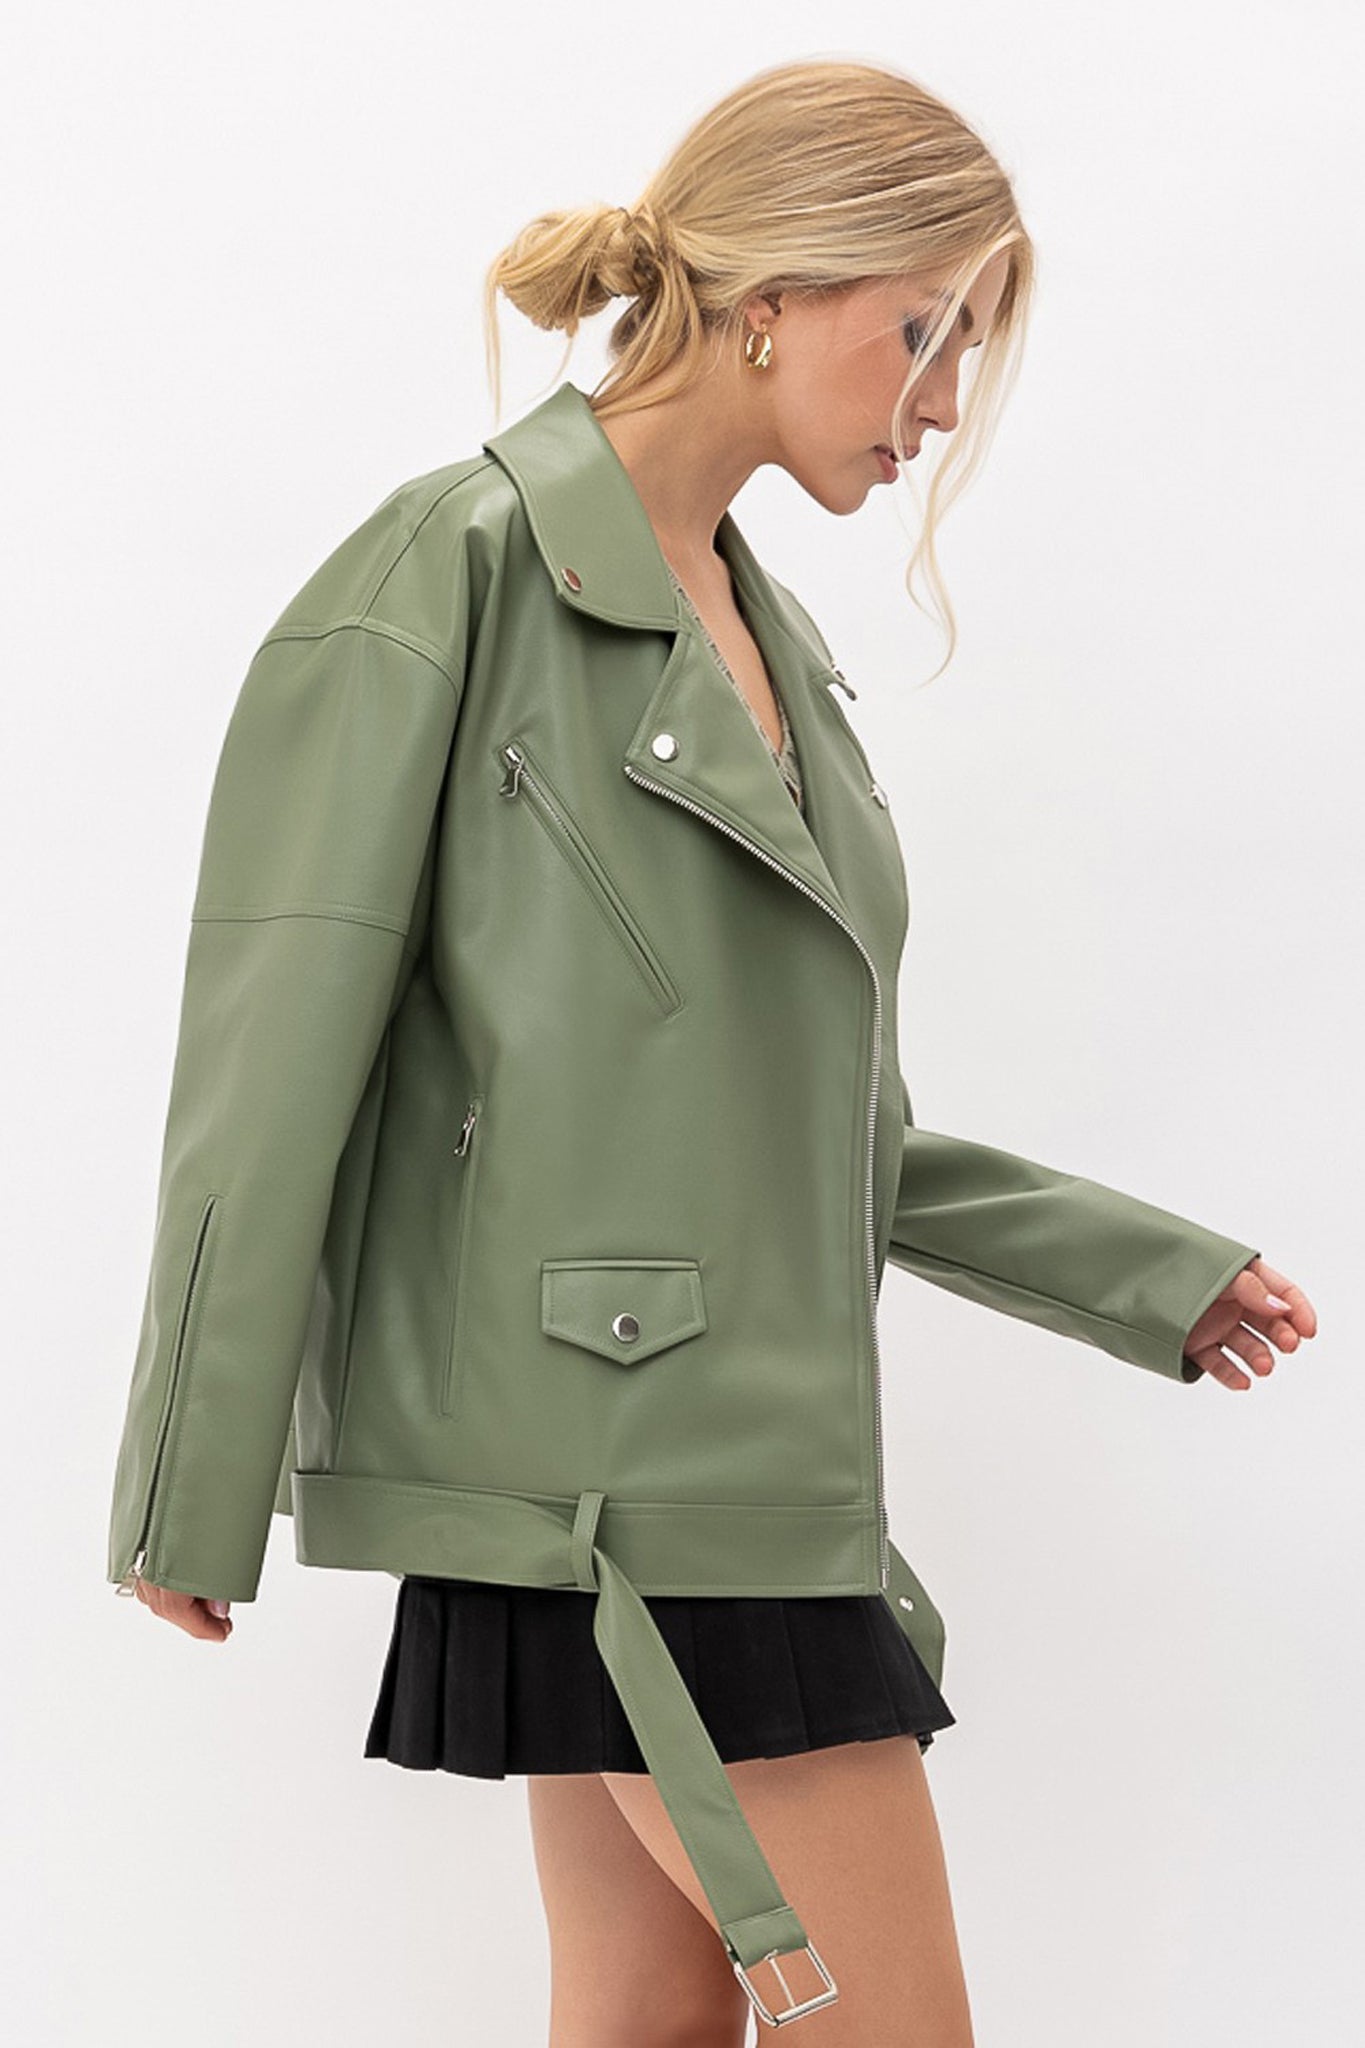 View 1 of Mozo Oversized Biker Jacket in Light Olive, a Jackets from Larrea Cove. Detail: 
Introduci...